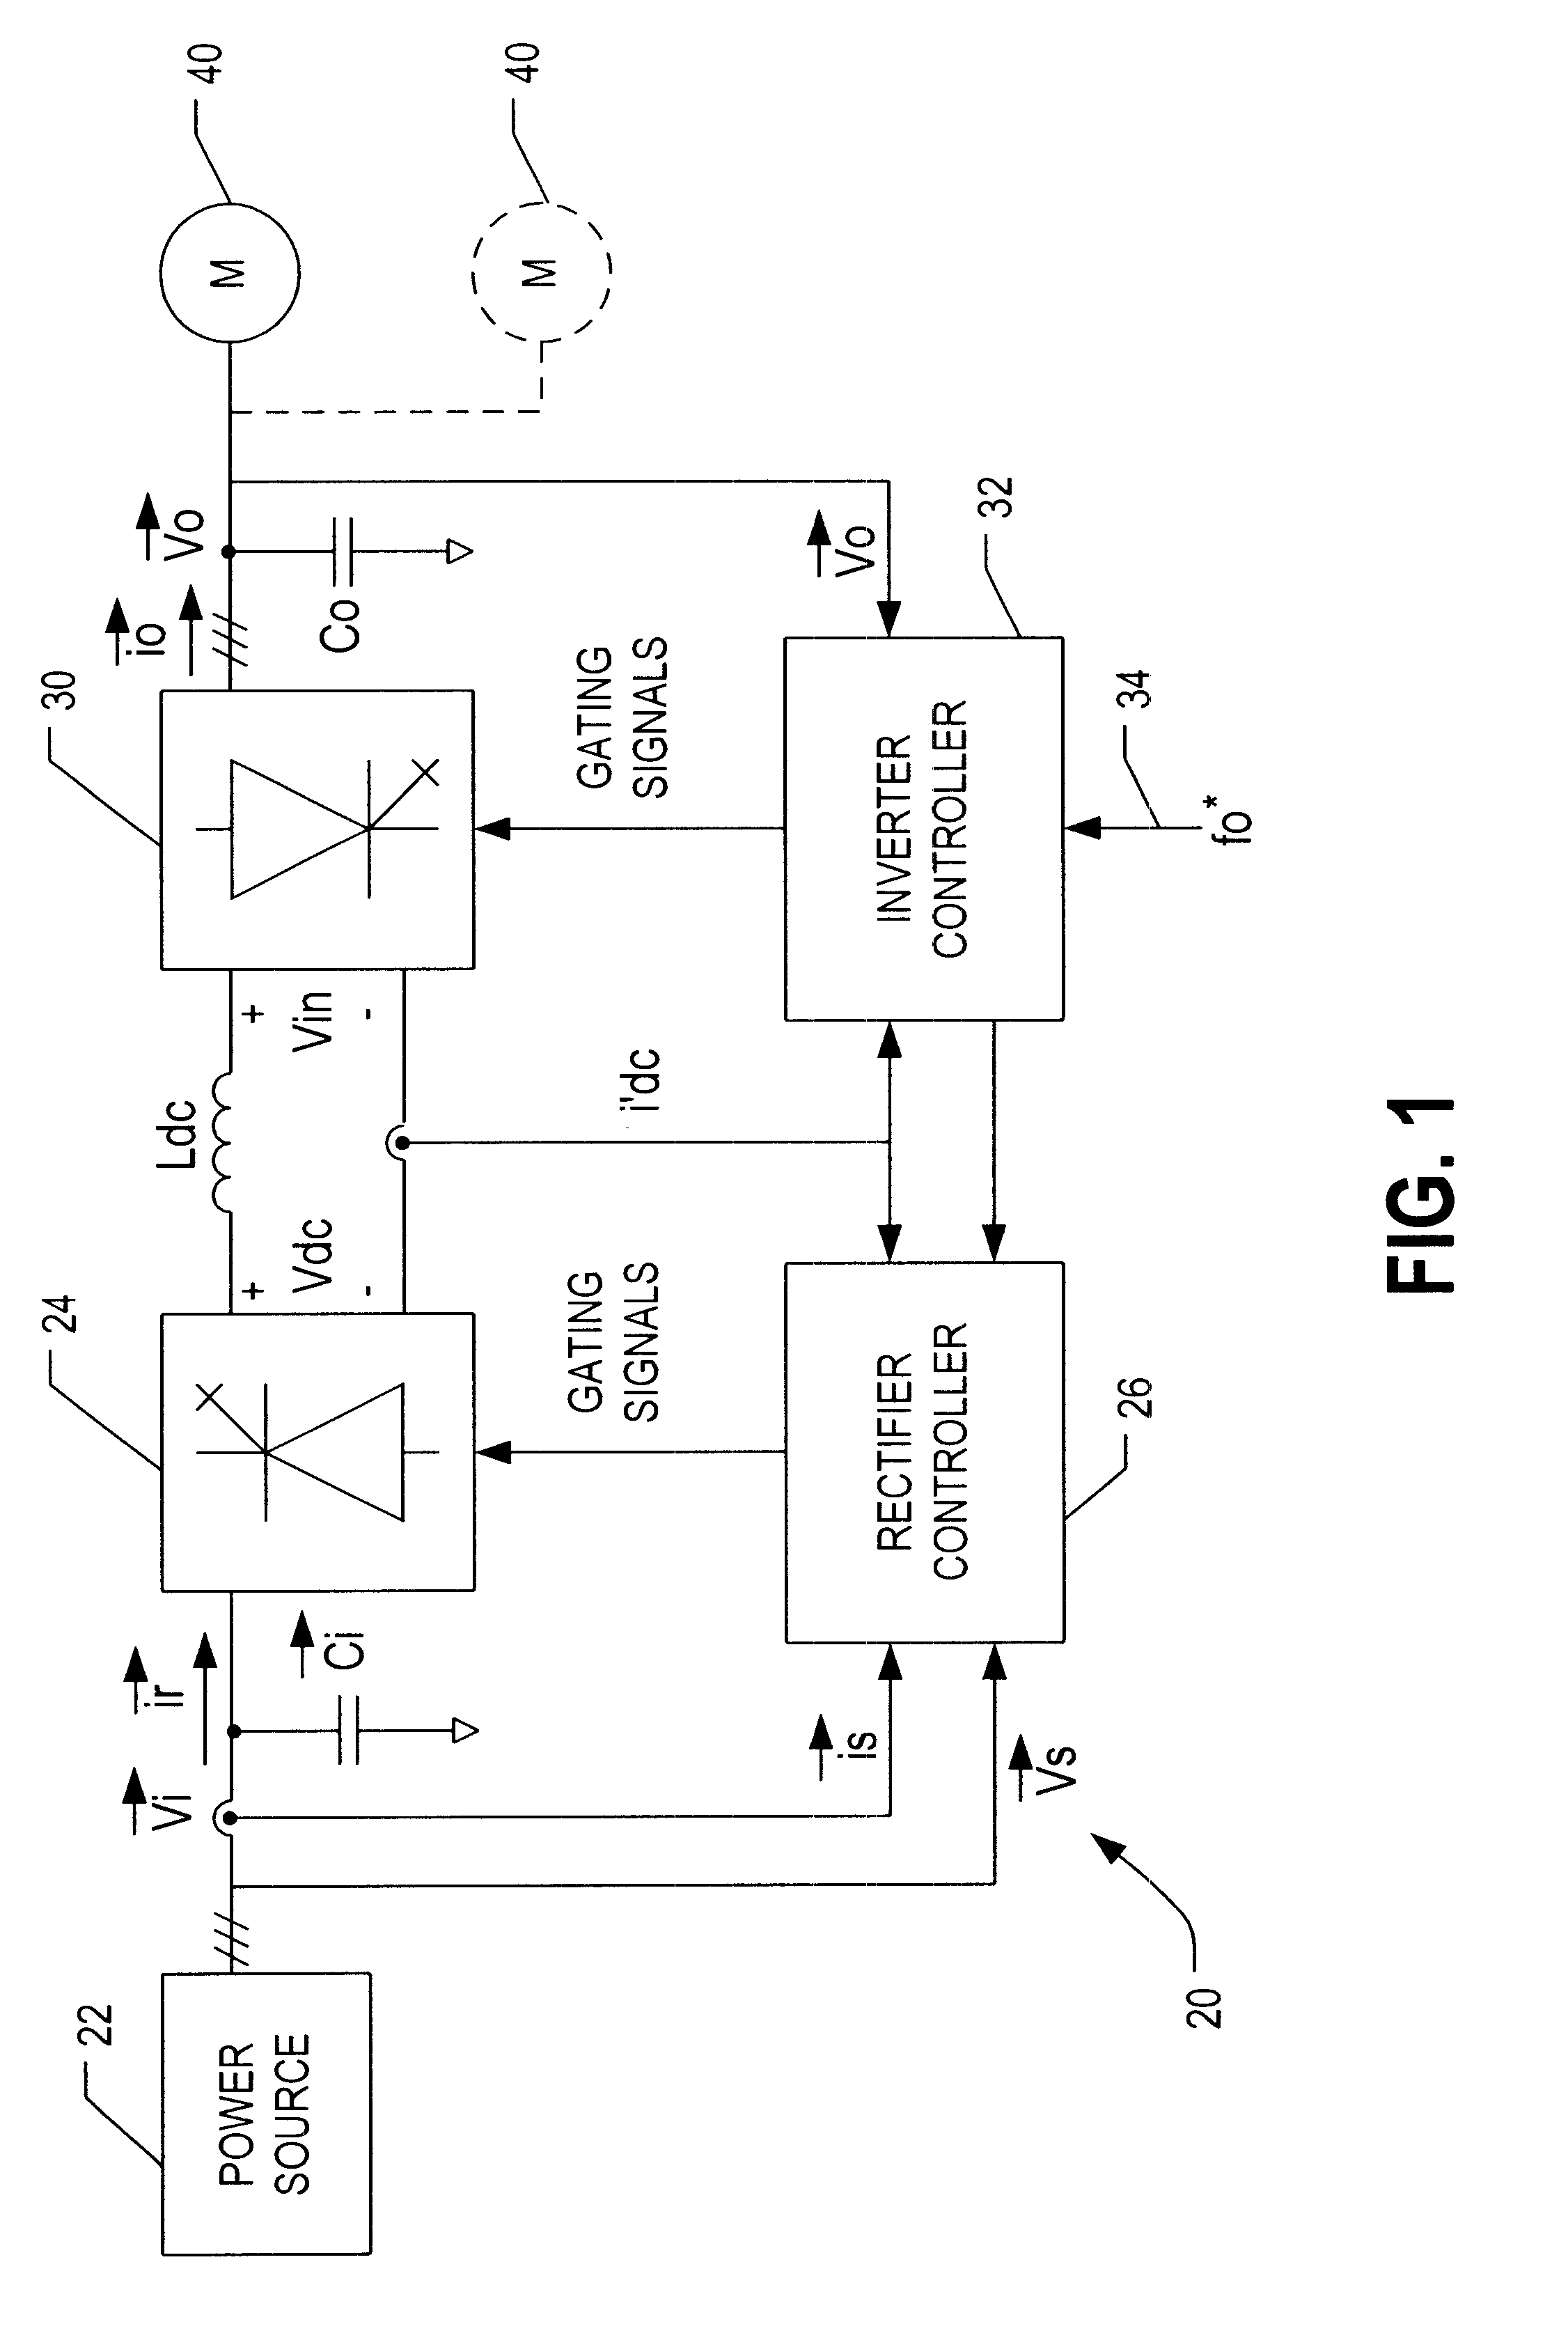 PWM rectifier having de-coupled power factor and output current control loops